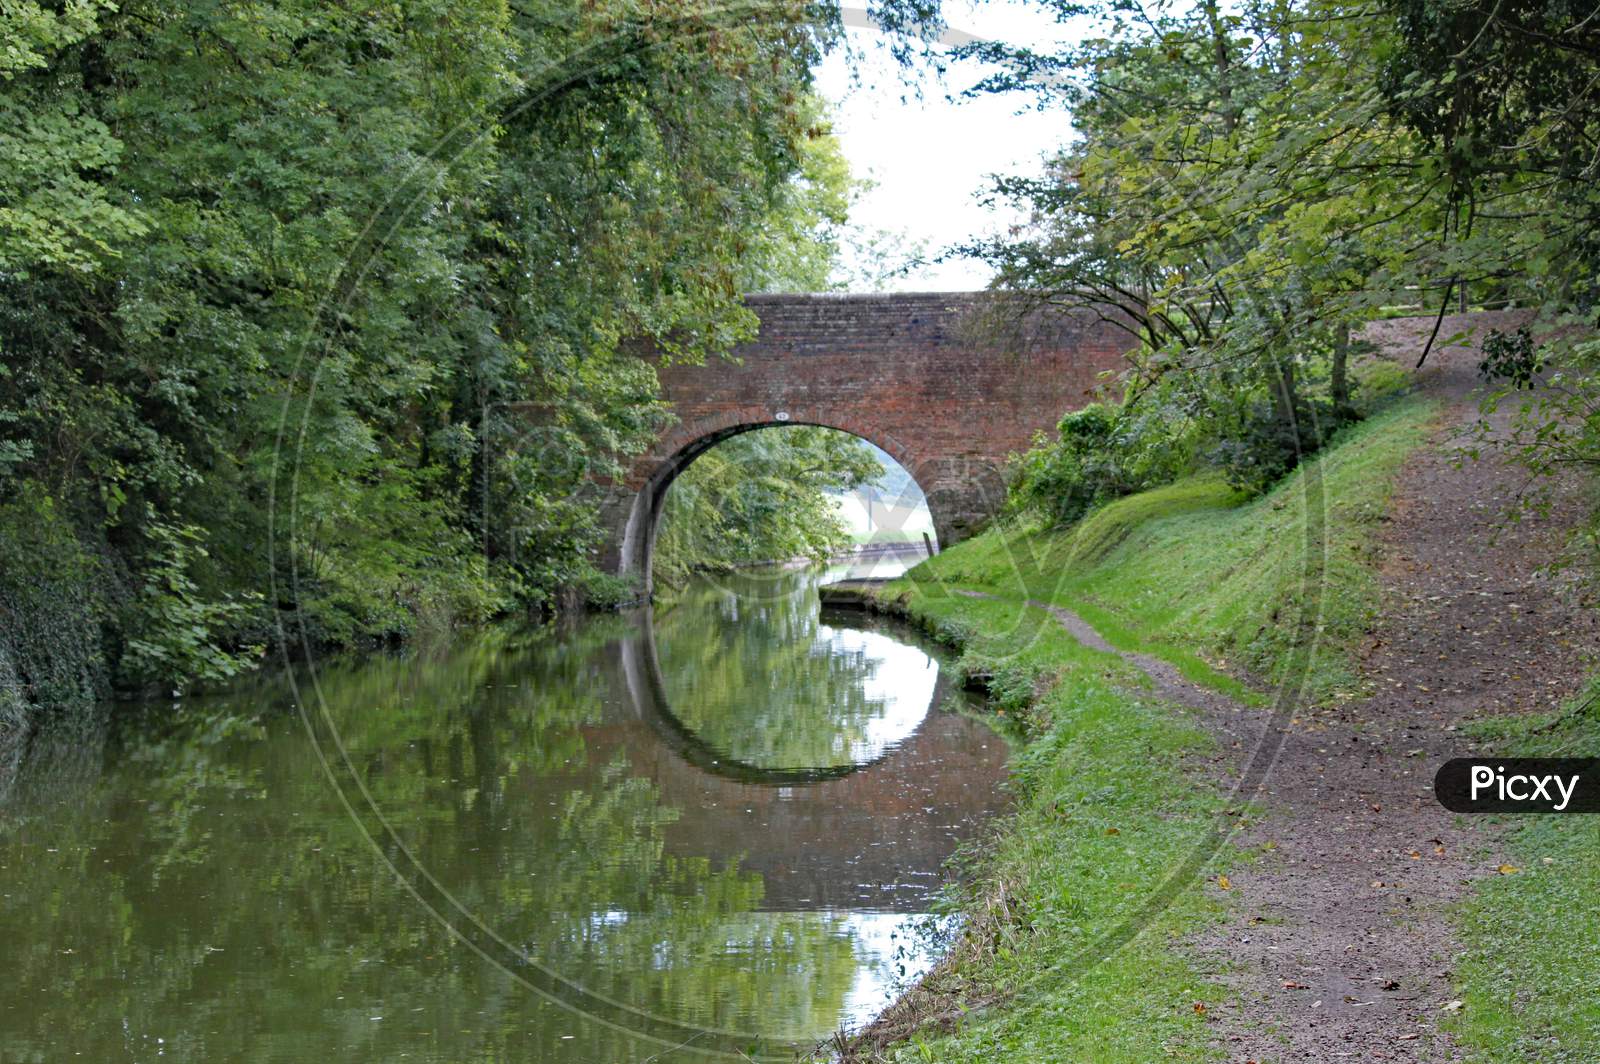 An Arched Bridge On The Grand Union Canal At Lapworth In Warwickshire, England